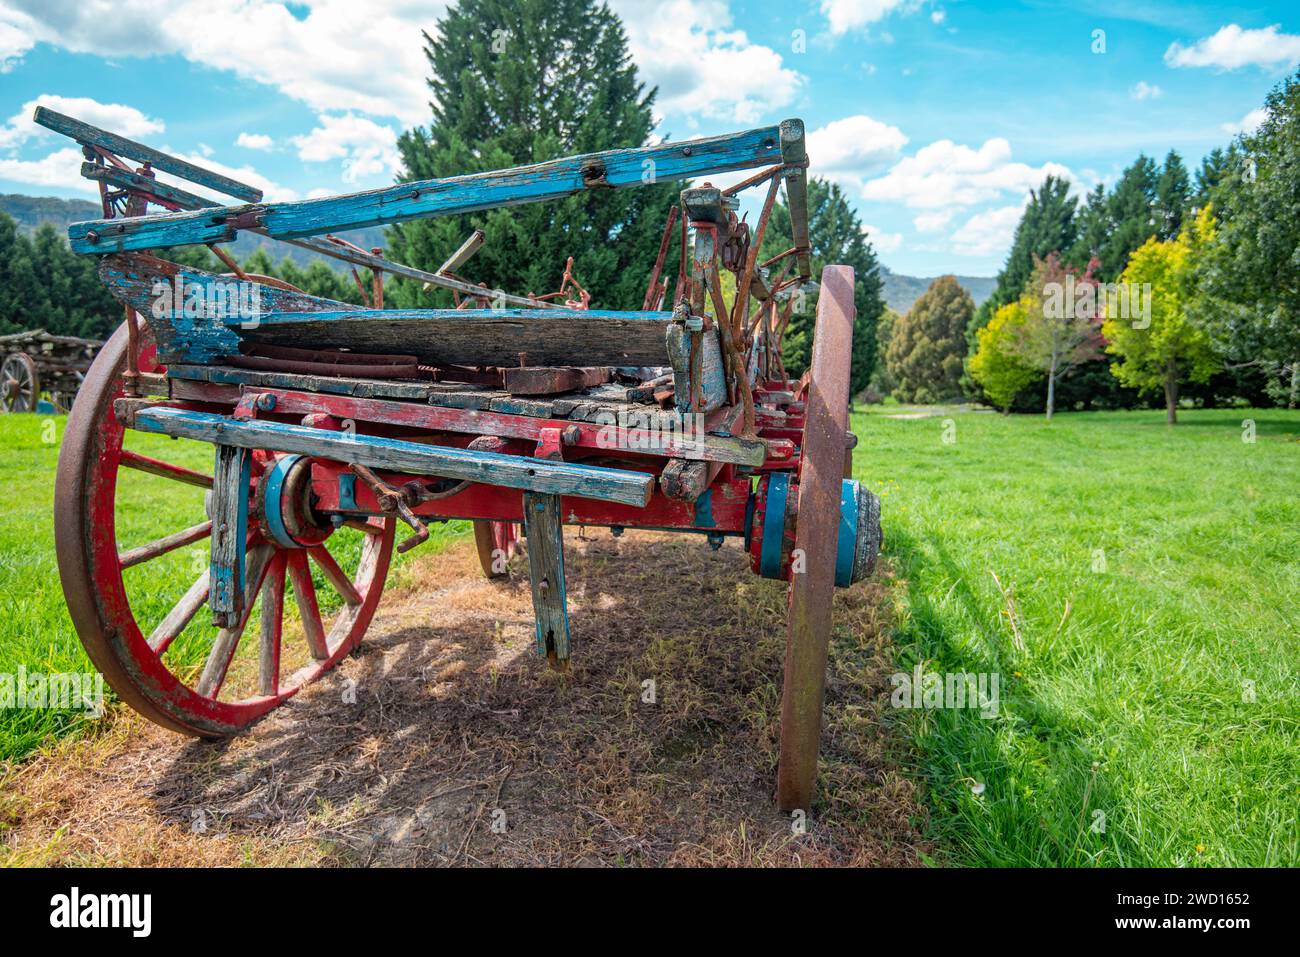 A closeup of an old dray or wagon in a grassy paddock in New South Wales, Australia. A relic of early farm transport with steel rimmed wooden wheels Stock Photo